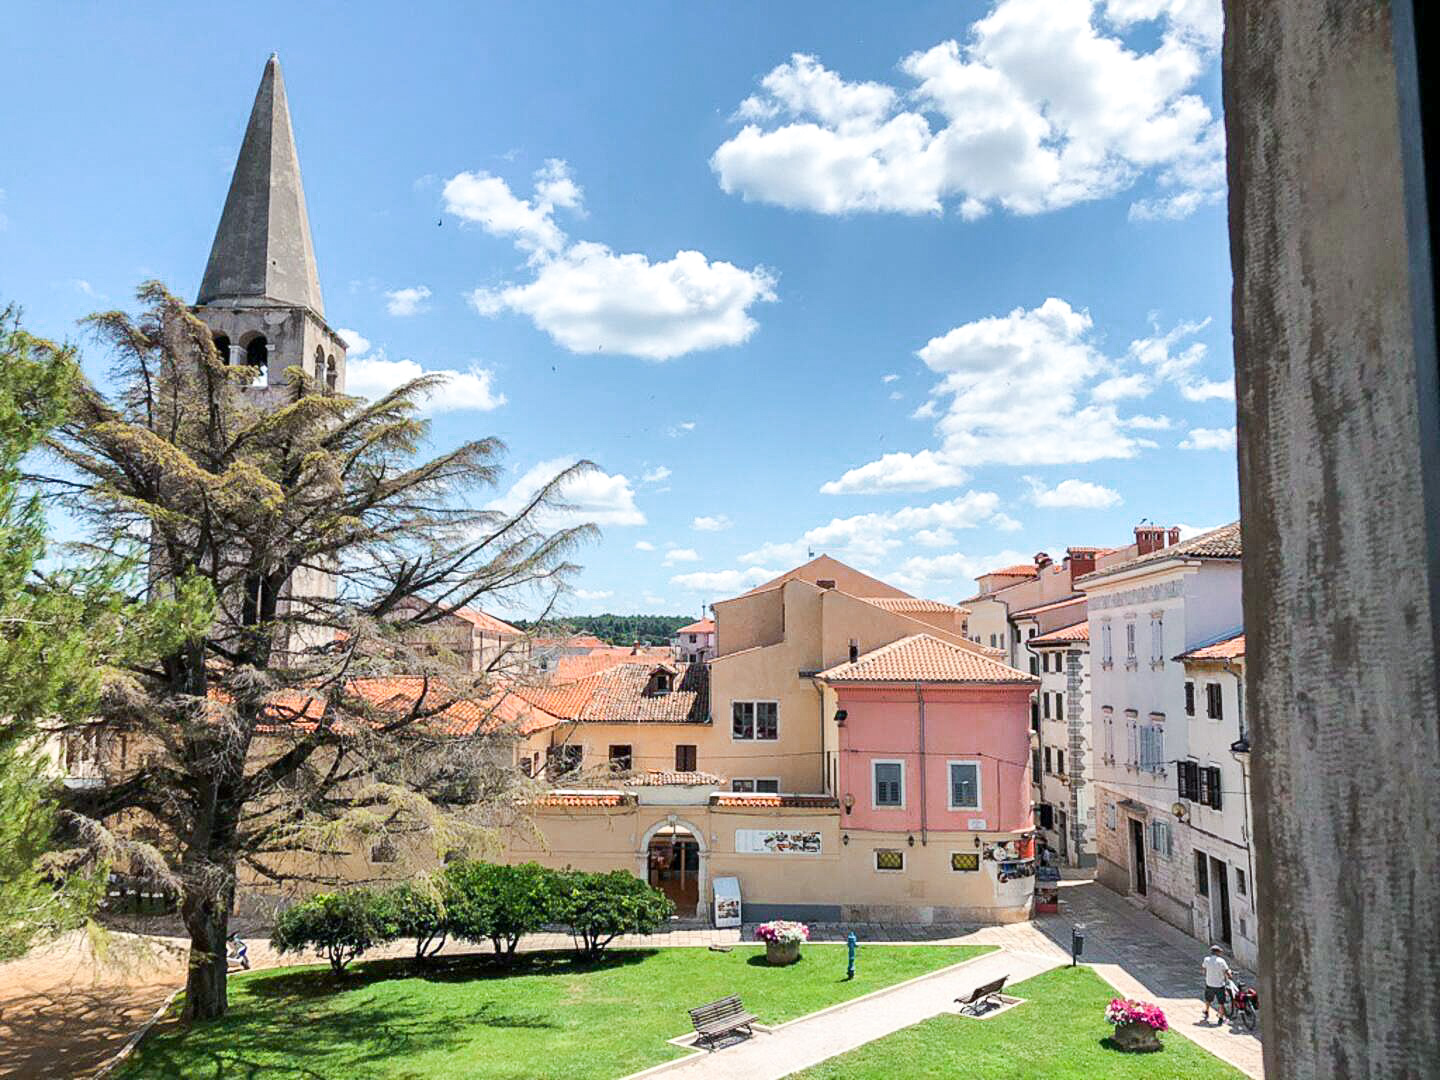 Where to stay in Istria, where to stay in Croatia, airbnb in croatia, best airbnbs croatia, airbnb porec, airbnb porec croatia, summer sanctuary porec, where to stay in porec croatia, private rooms in istria, best places to stay in istria